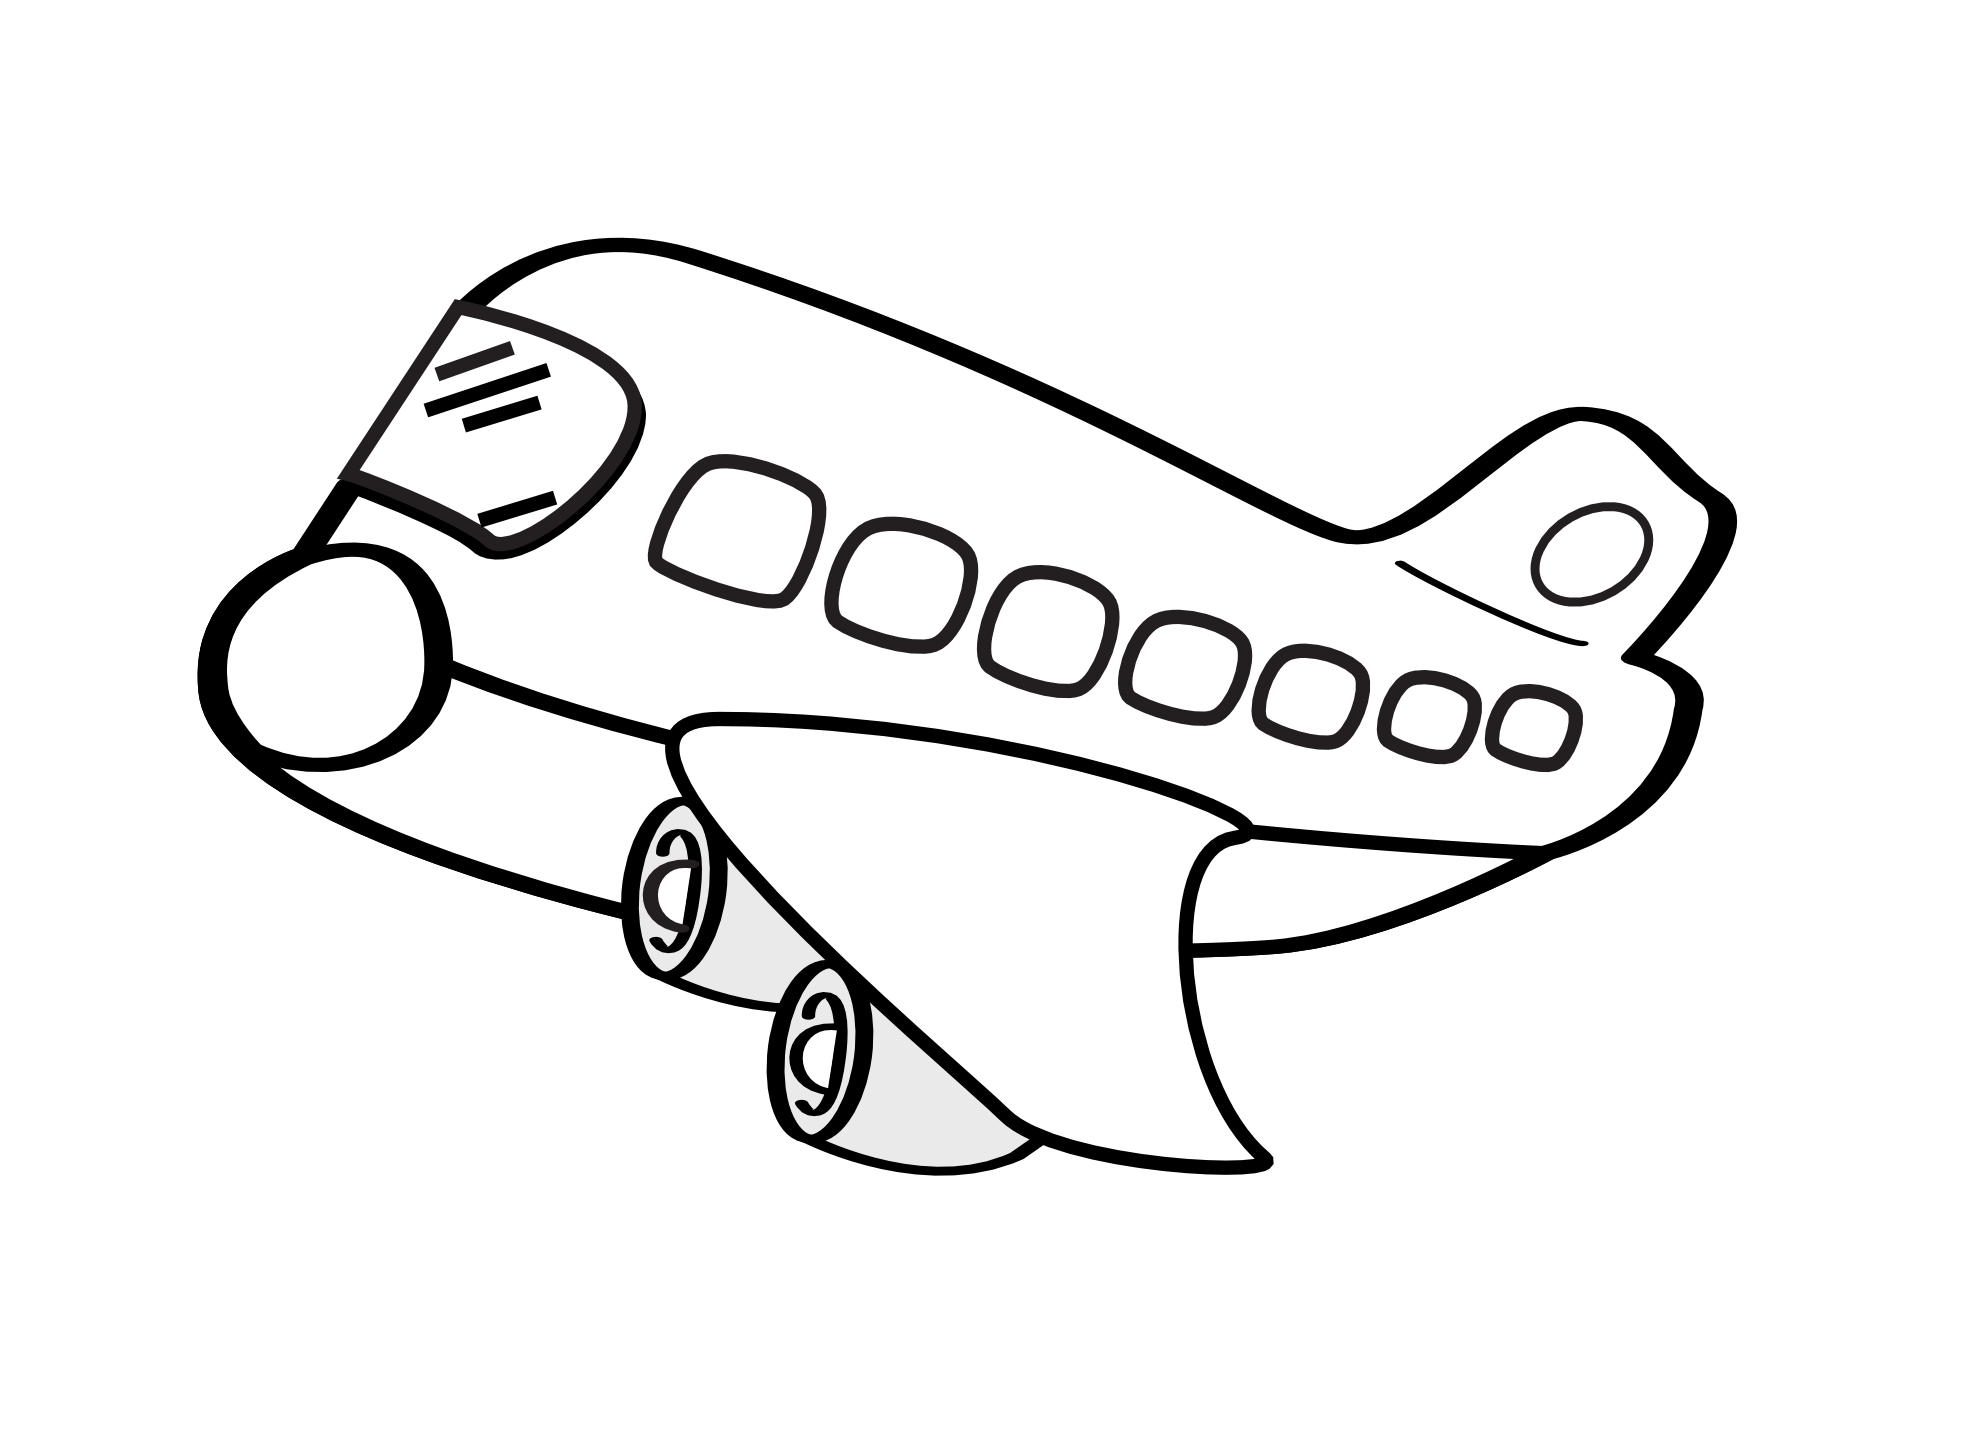 Windy clipart cartoon. Airplane black and white